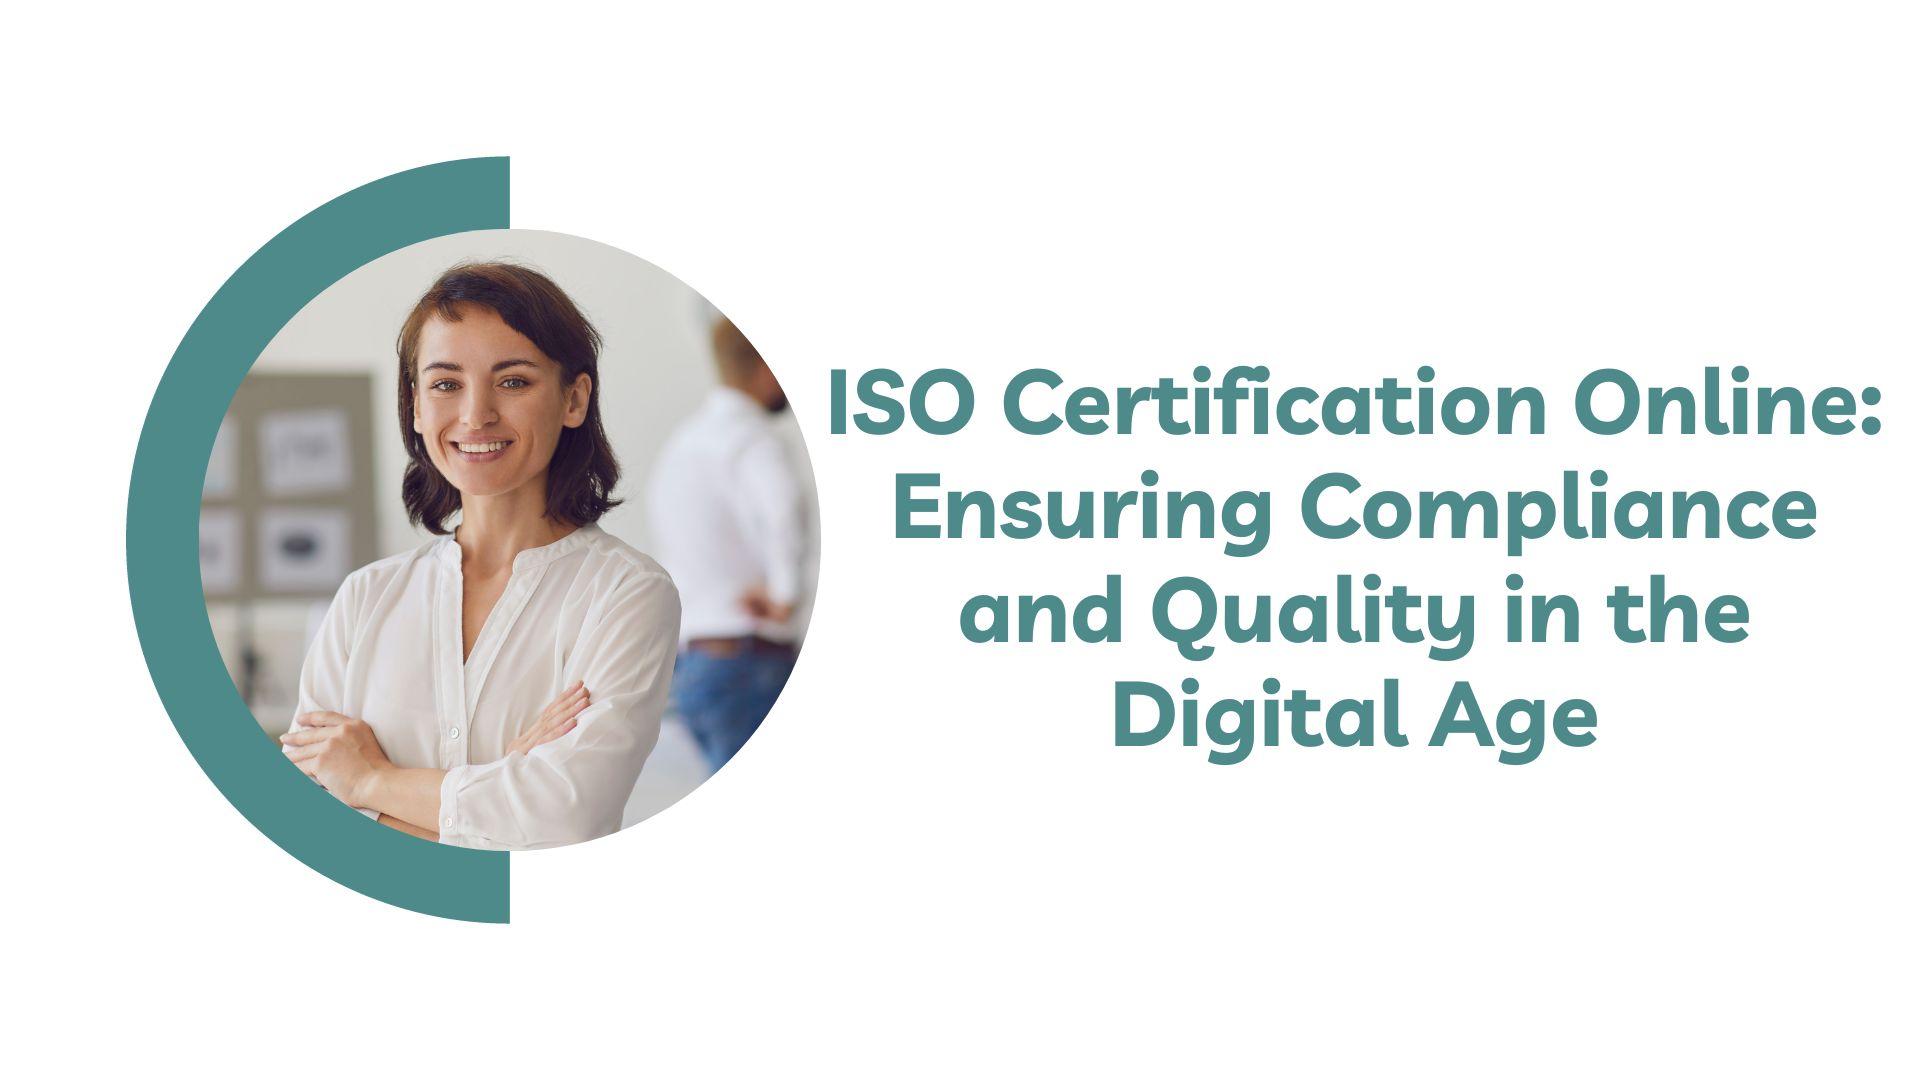 ISO Certification Online: Ensuring Compliance and Quality in the Digital Age